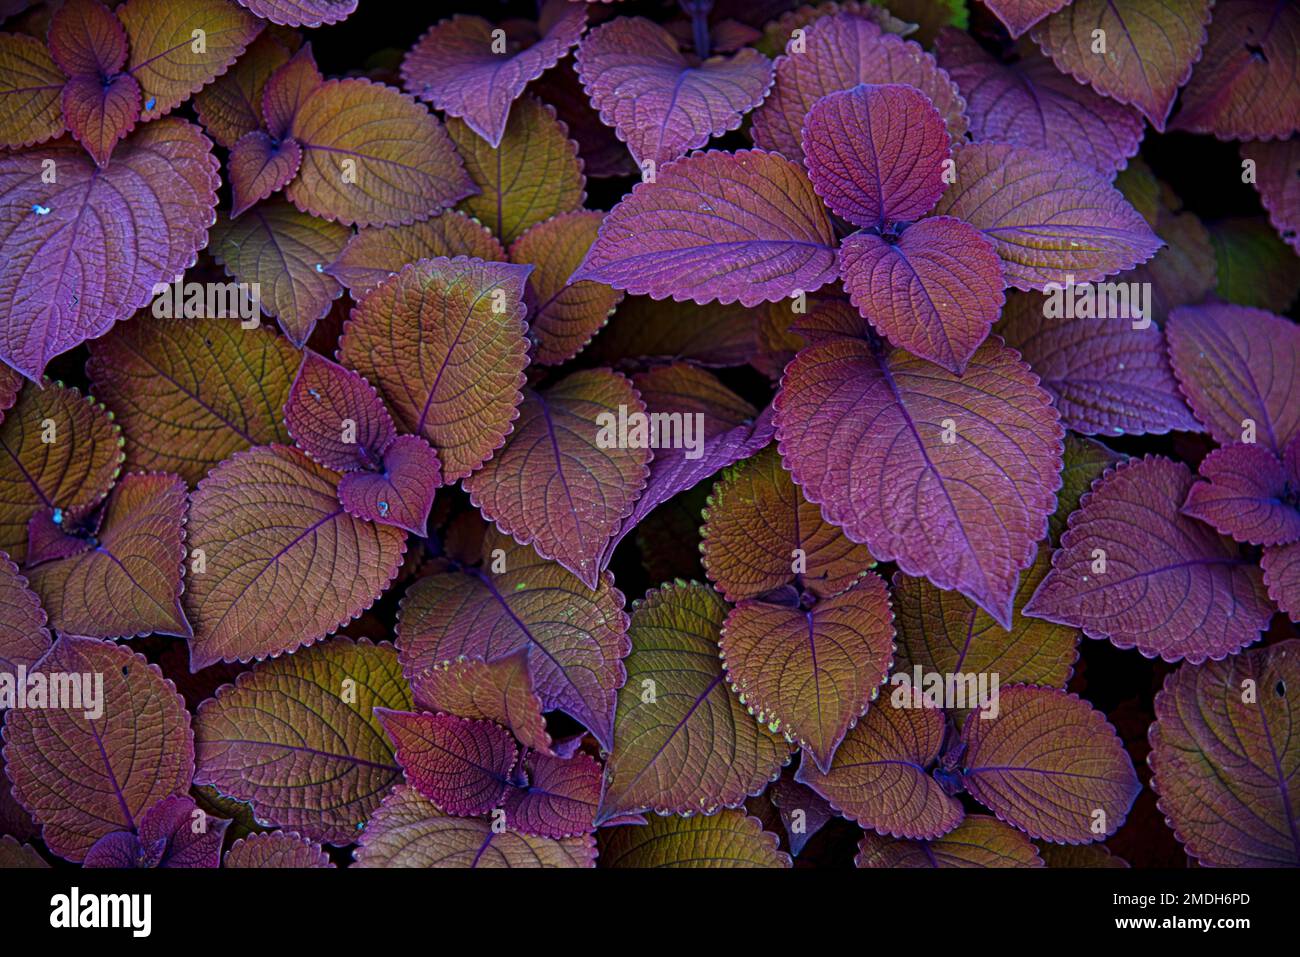 Purple leaves dance in contrast, their vivid hue casting shadows that reveal nature's intricate artistry. Stock Photo